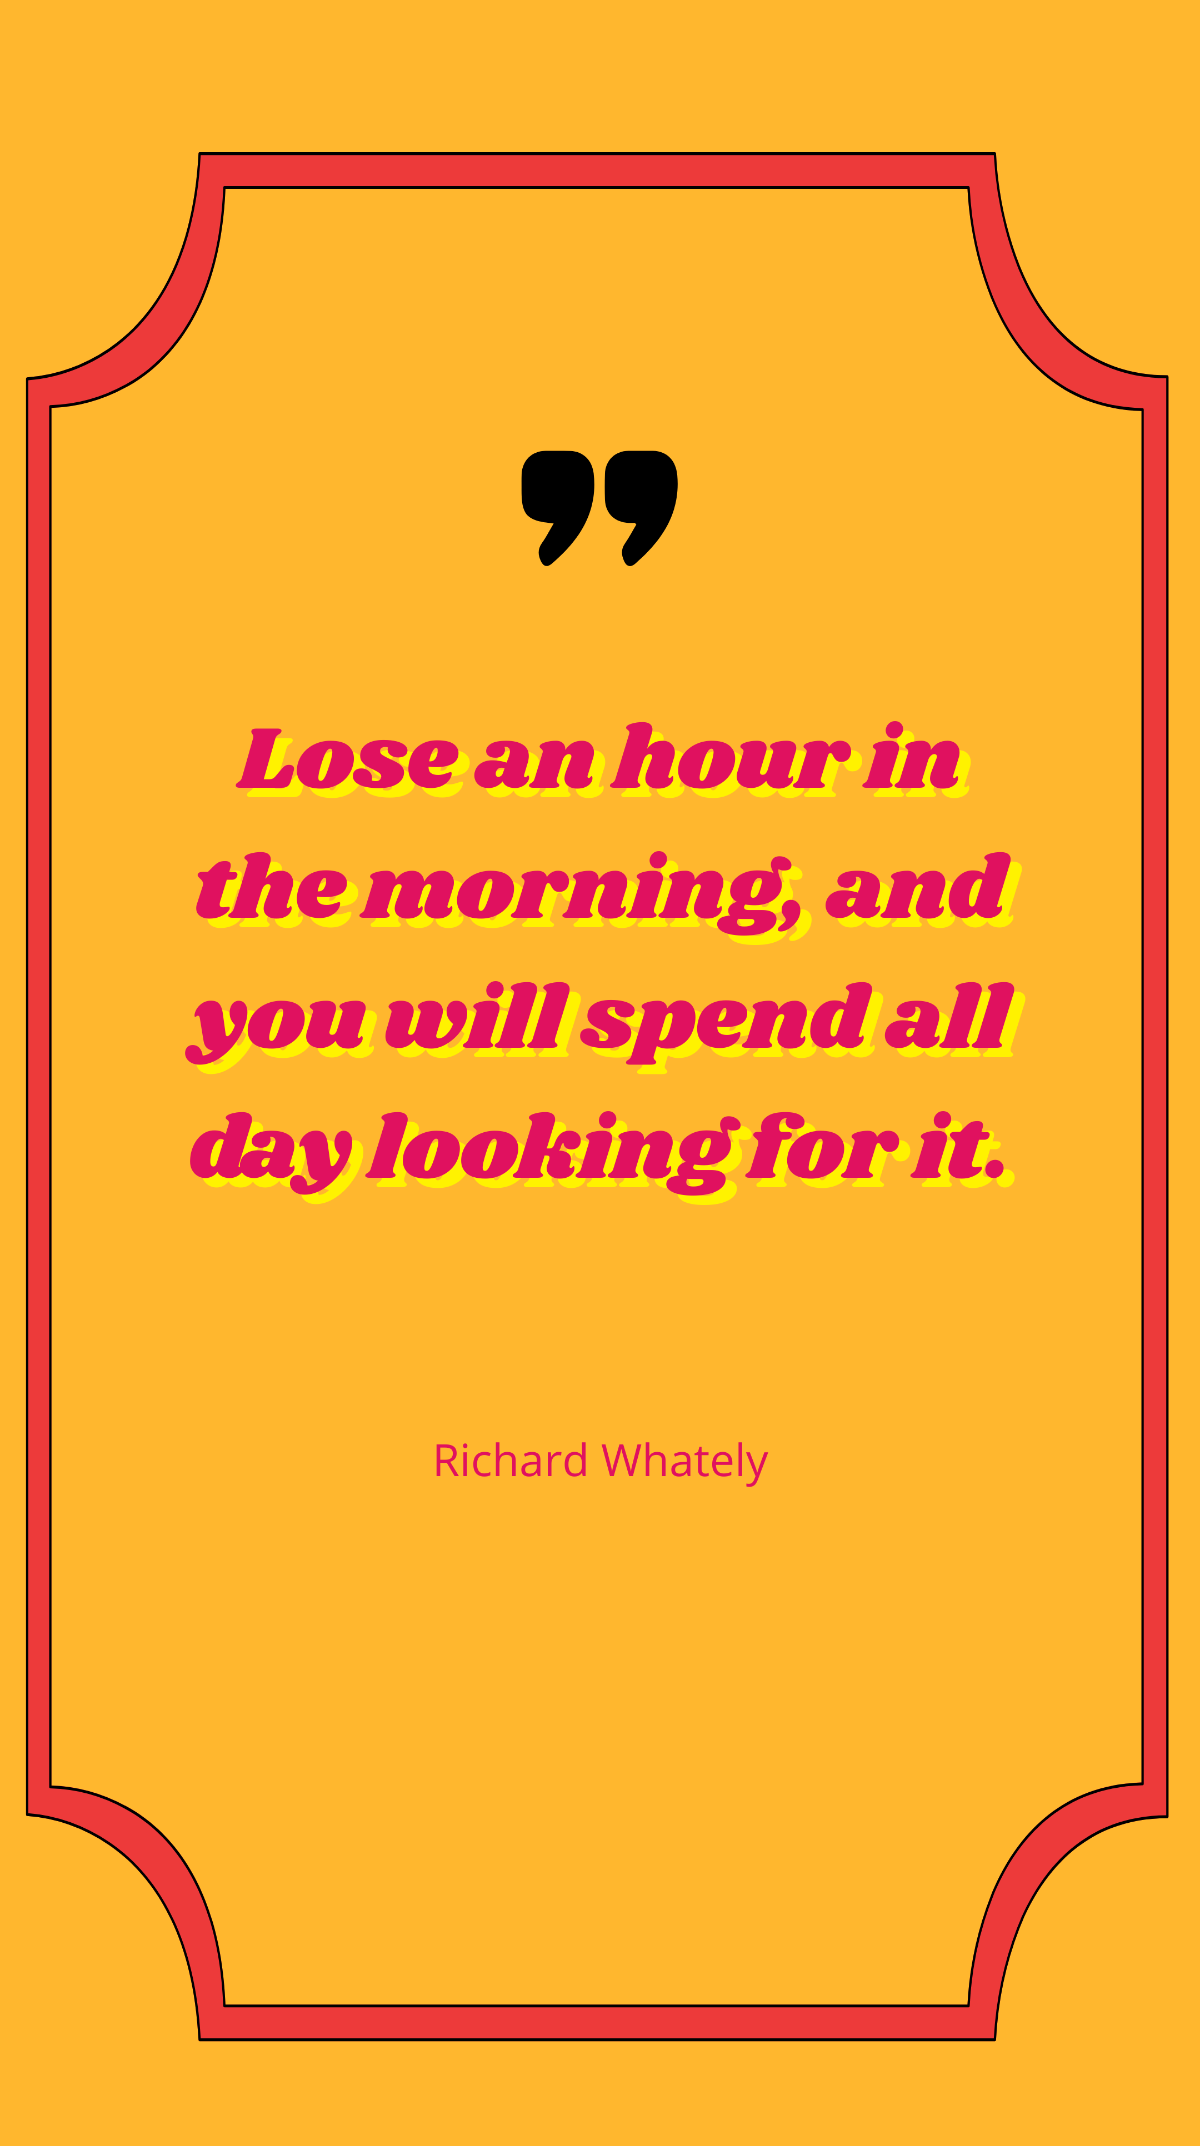 Richard Whately - Lose an hour in the morning, and you will spend all day looking for it. Template